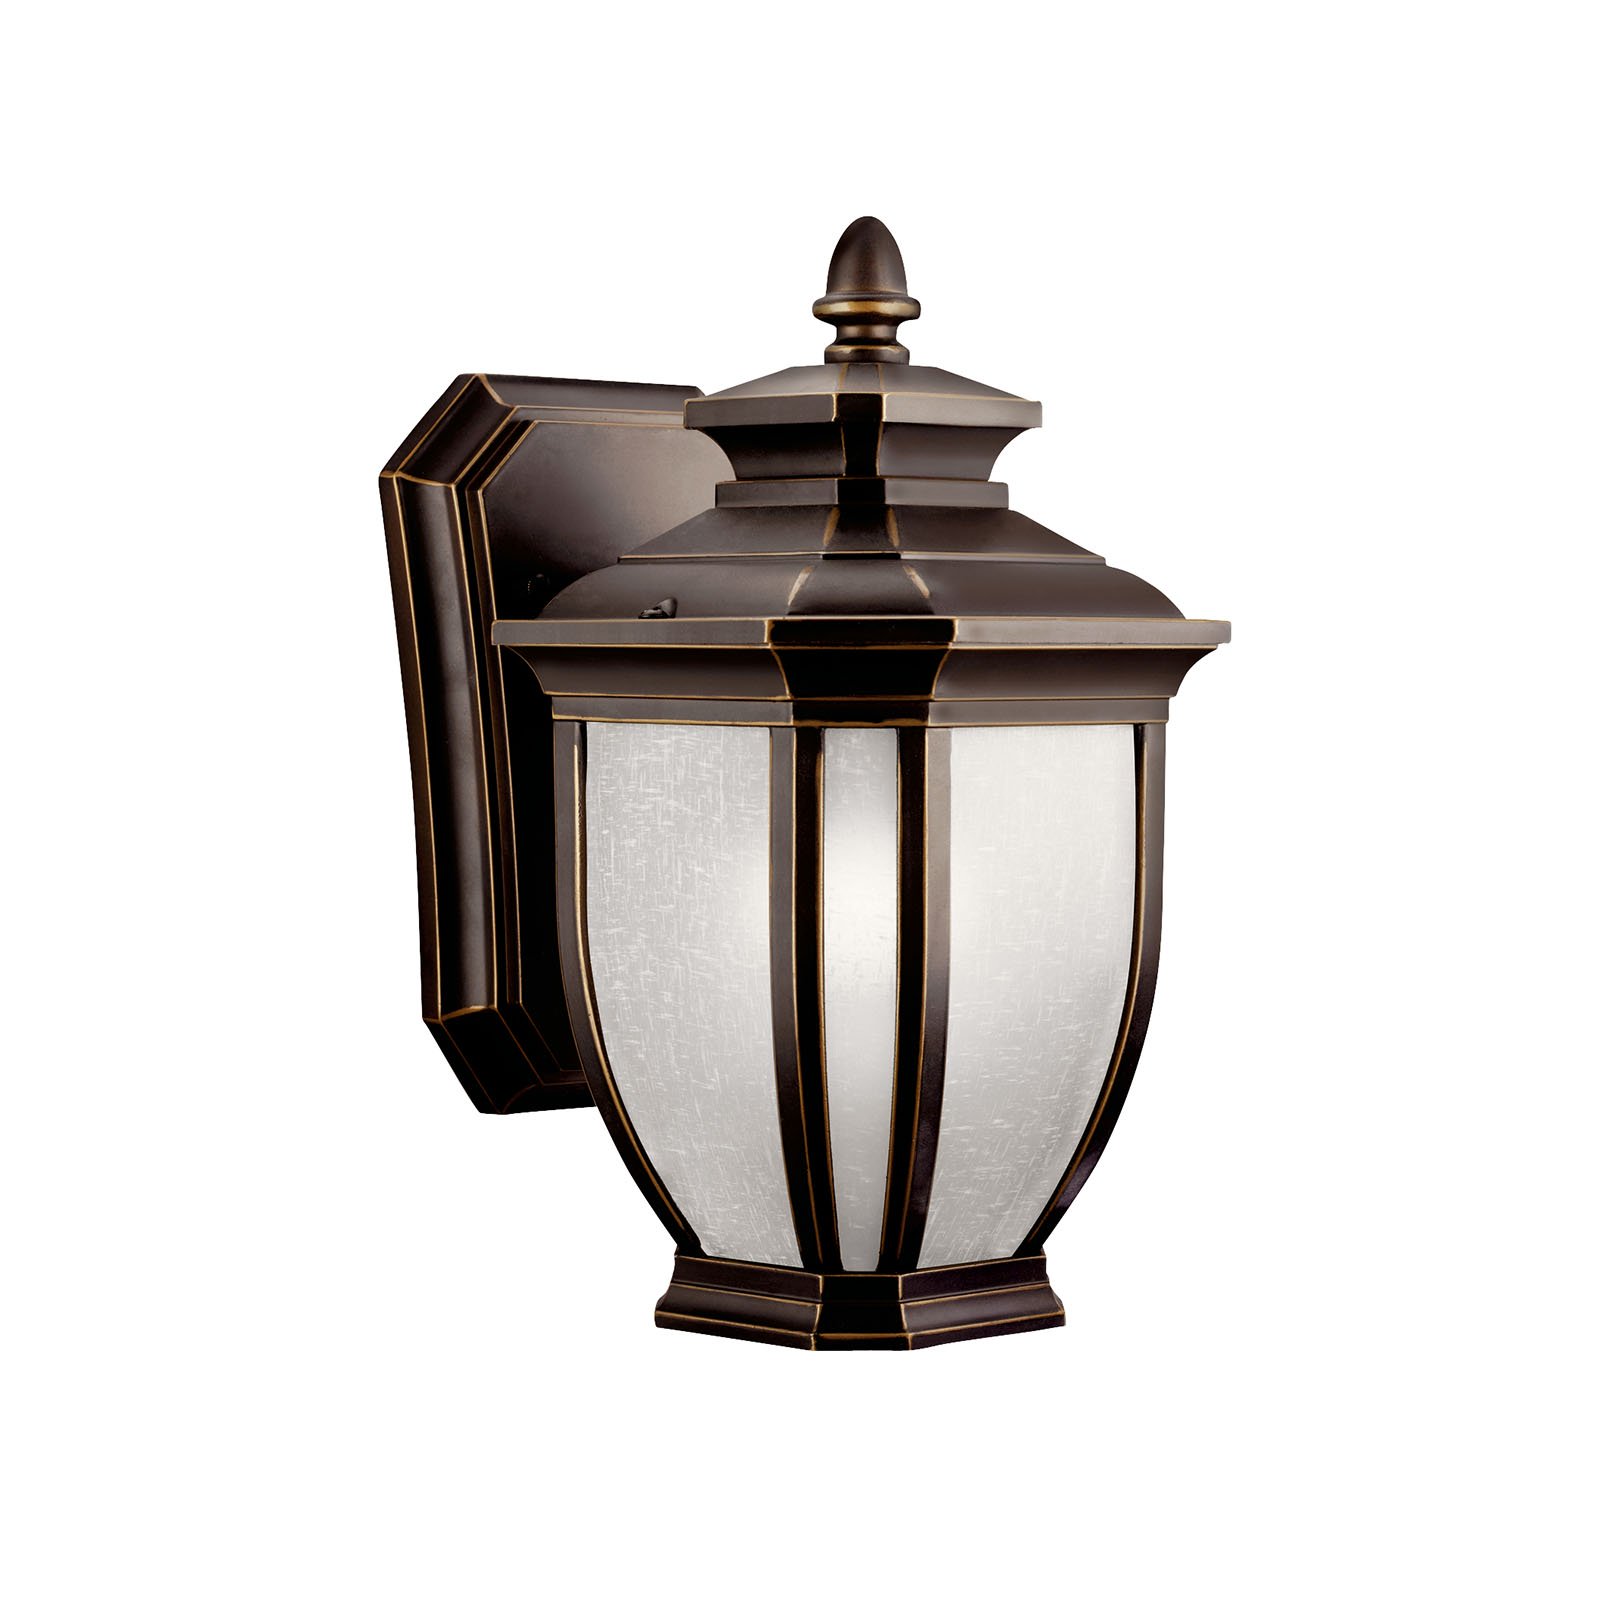 With an unmistakable British influence, this 1 light wall fixture from the elegant Salisbury(TM) collection projects timeless style for exterior spaces. Accented with a Rubbed Bronze(TM) finish and White Linen Glass, this piece is as functional as it is refined.